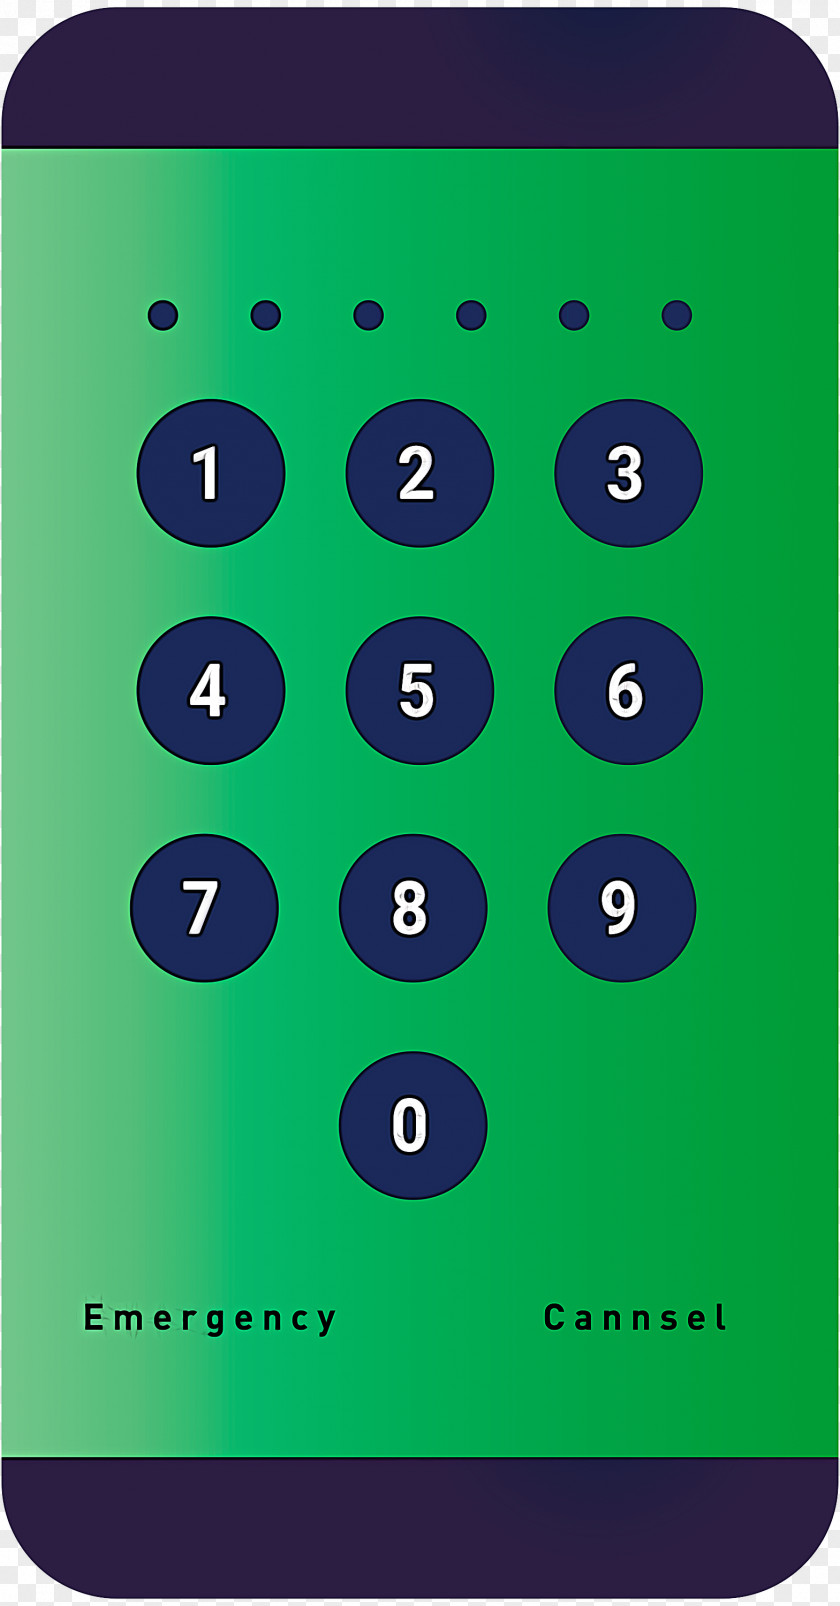 Android Passcode Lock Password PNG